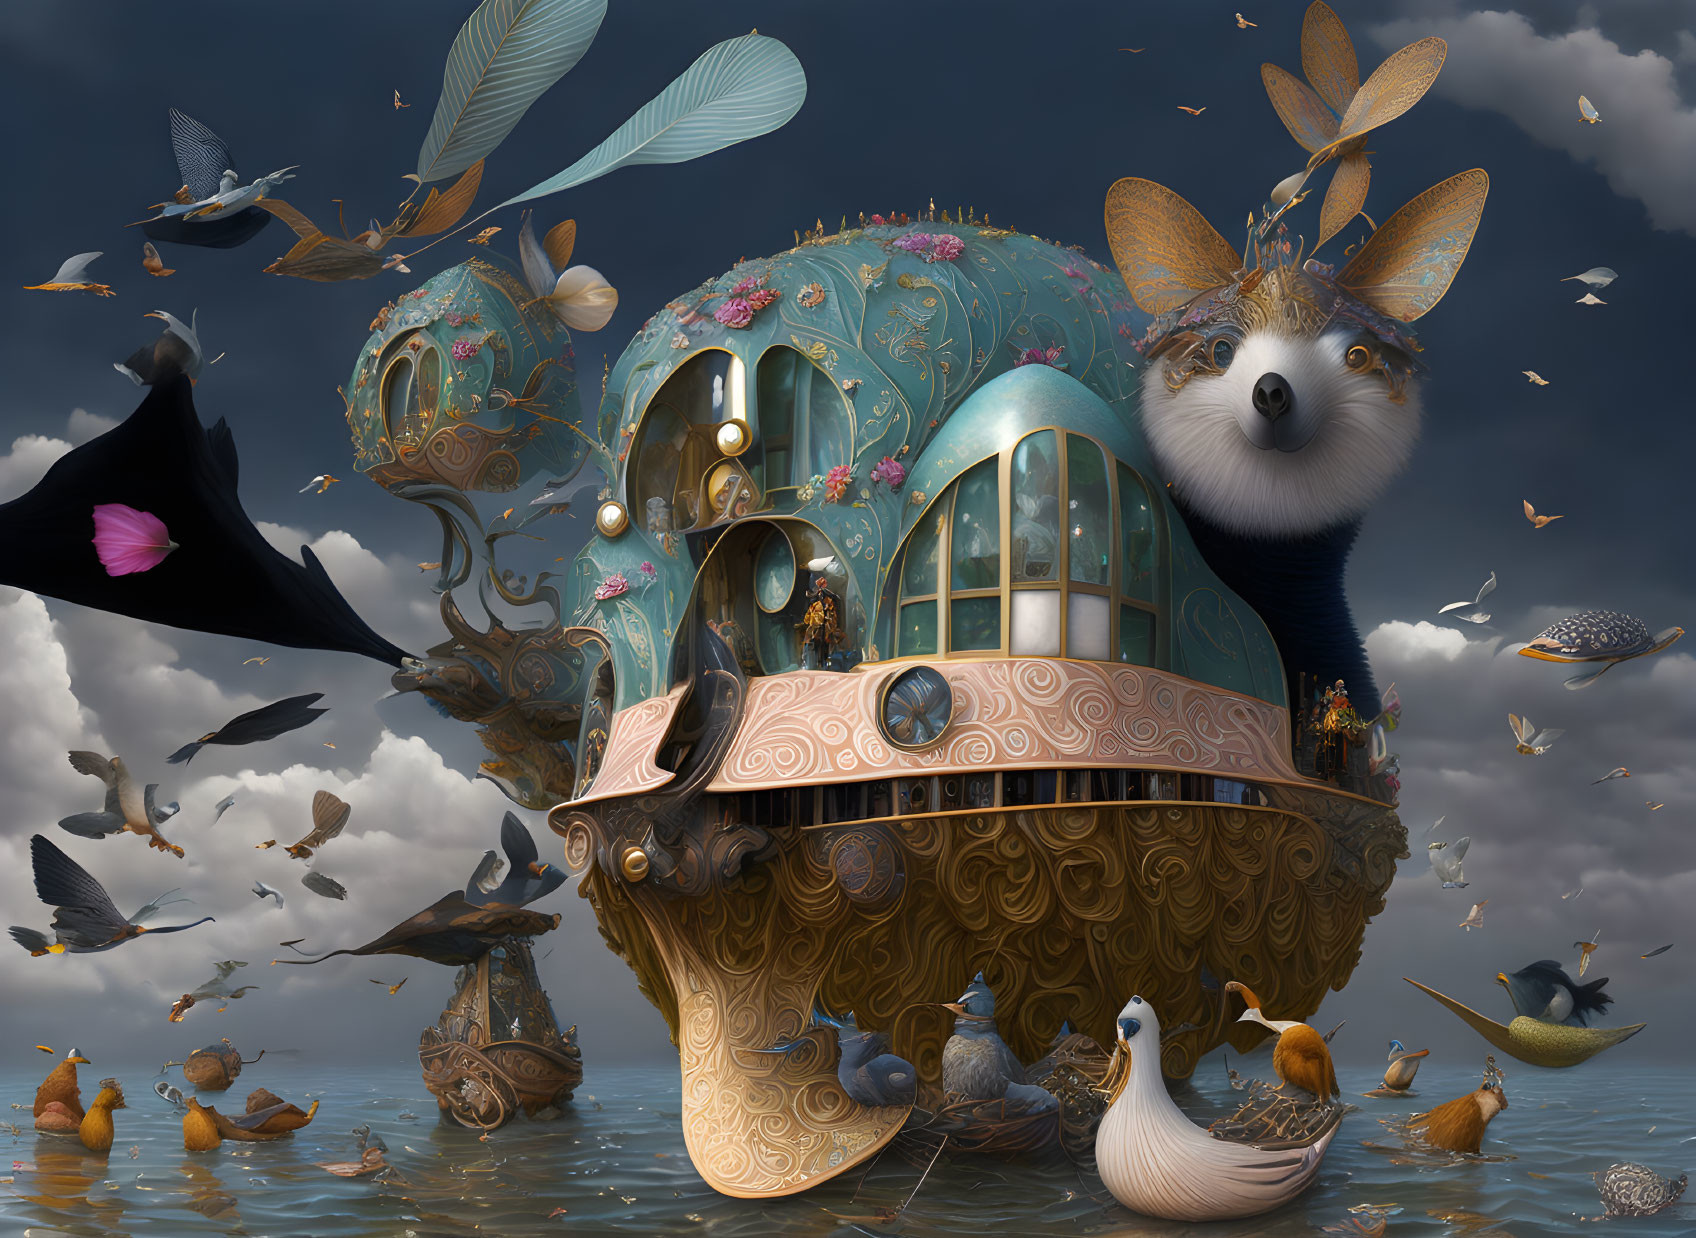 Fantastical animal-shaped houseboat with fox head in whimsical image